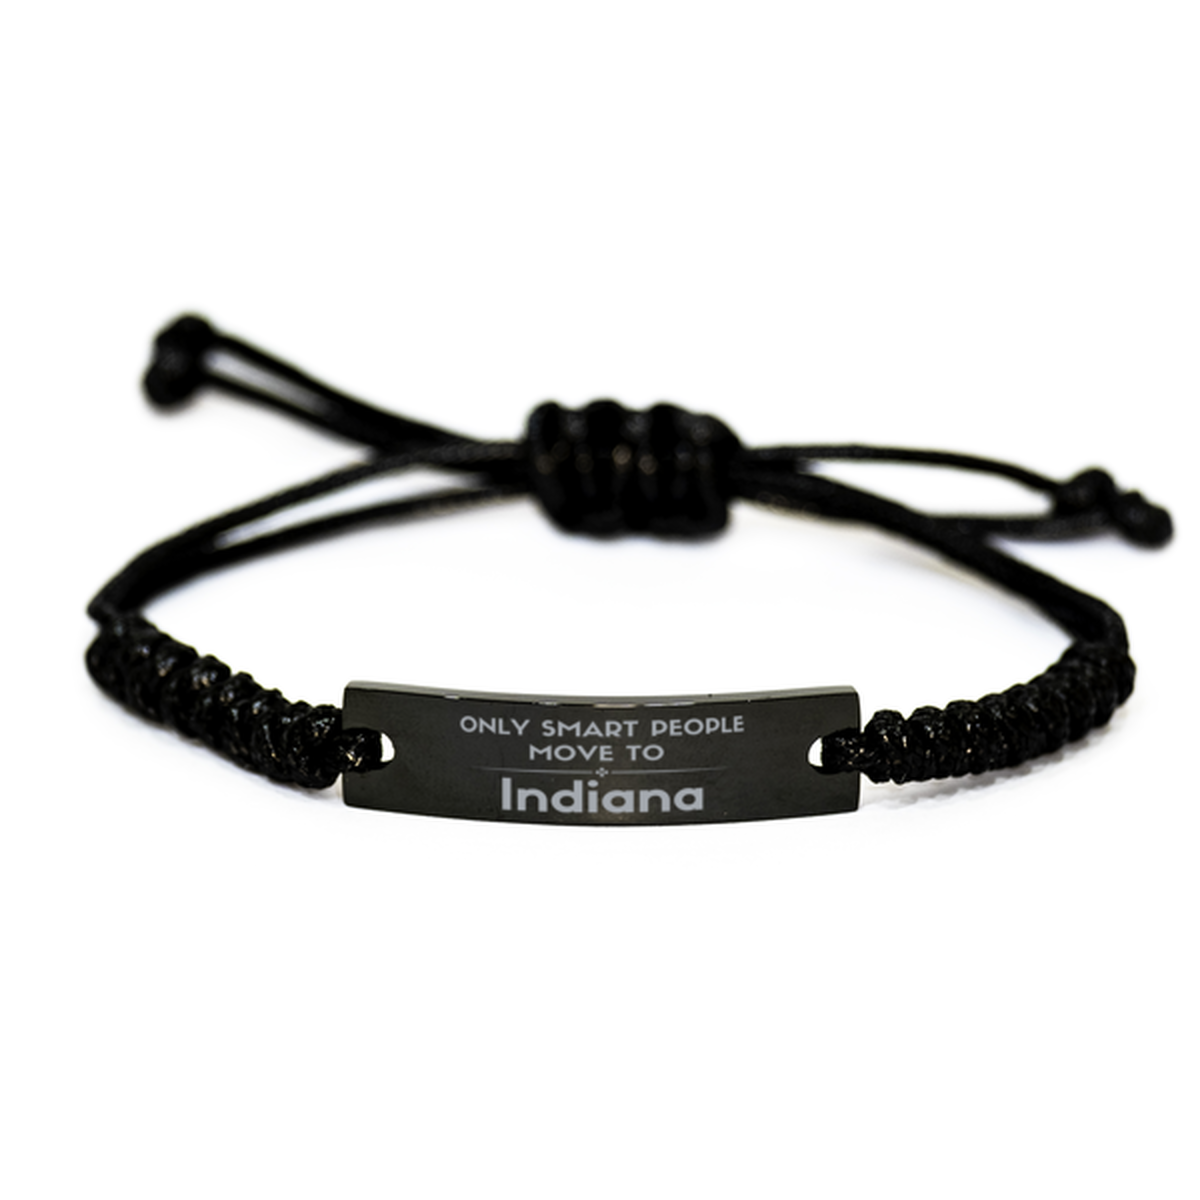 Only smart people move to Indiana Black Rope Bracelet, Gag Gifts For Indiana, Move to Indiana Gifts for Friends Coworker Funny Saying Quote